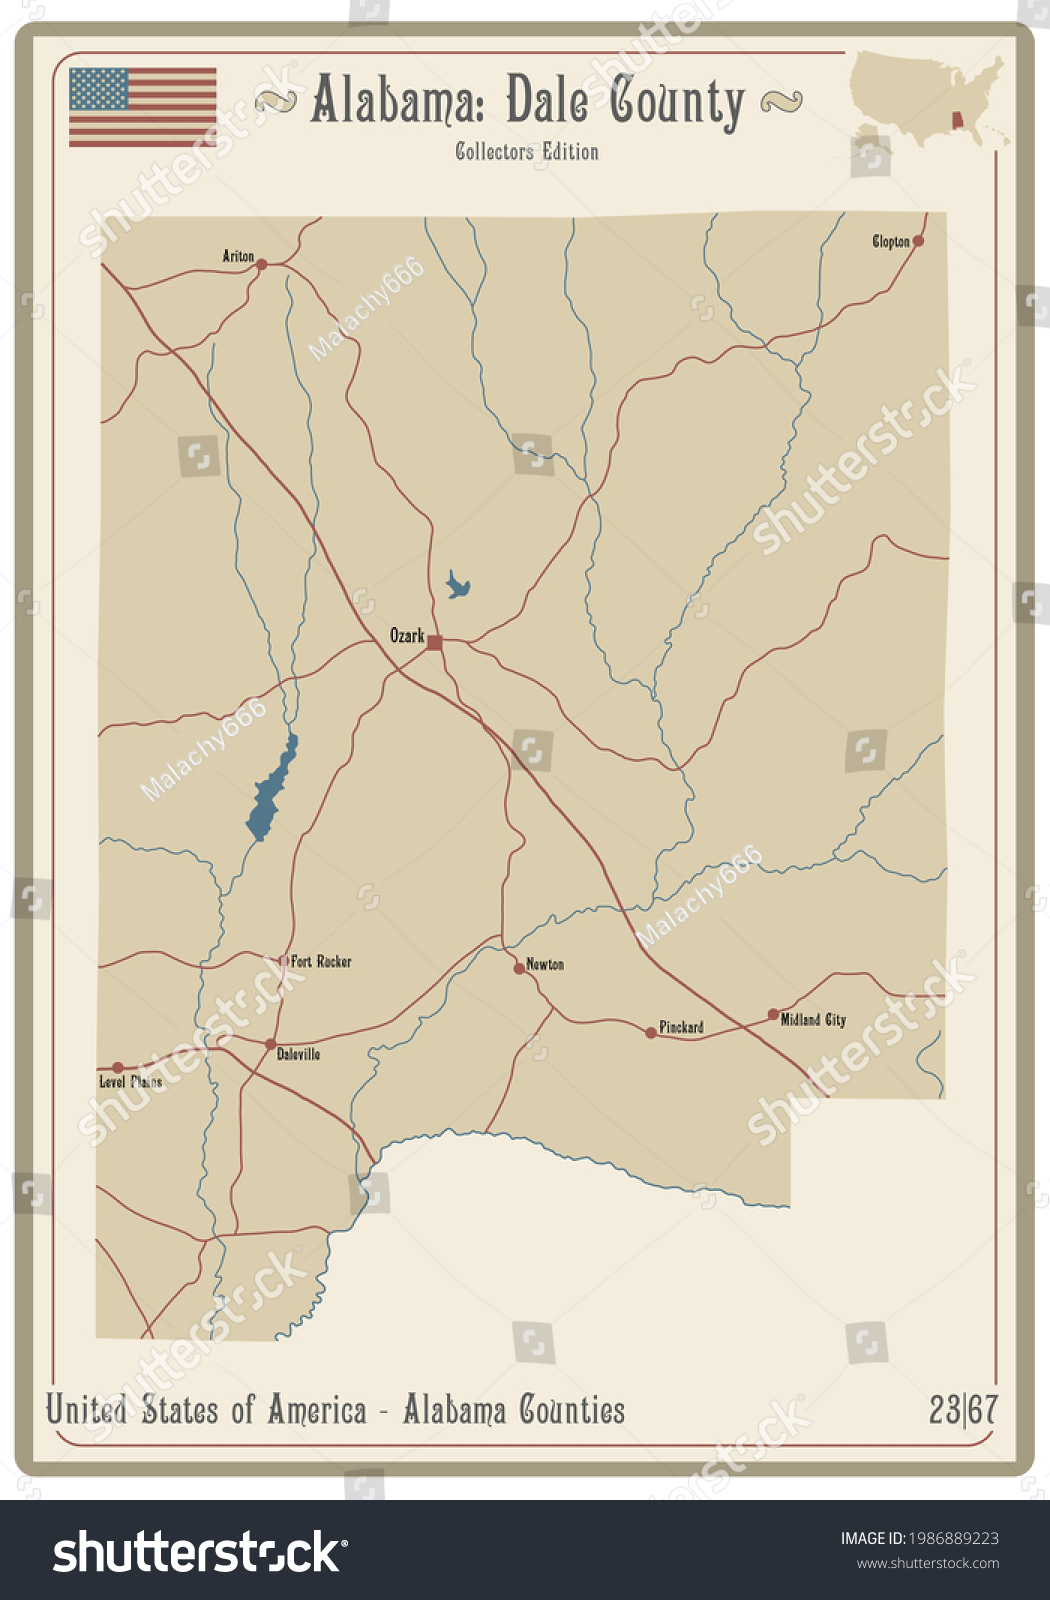 SVG of Map on an old playing card of Dale county in Alabama, USA. svg